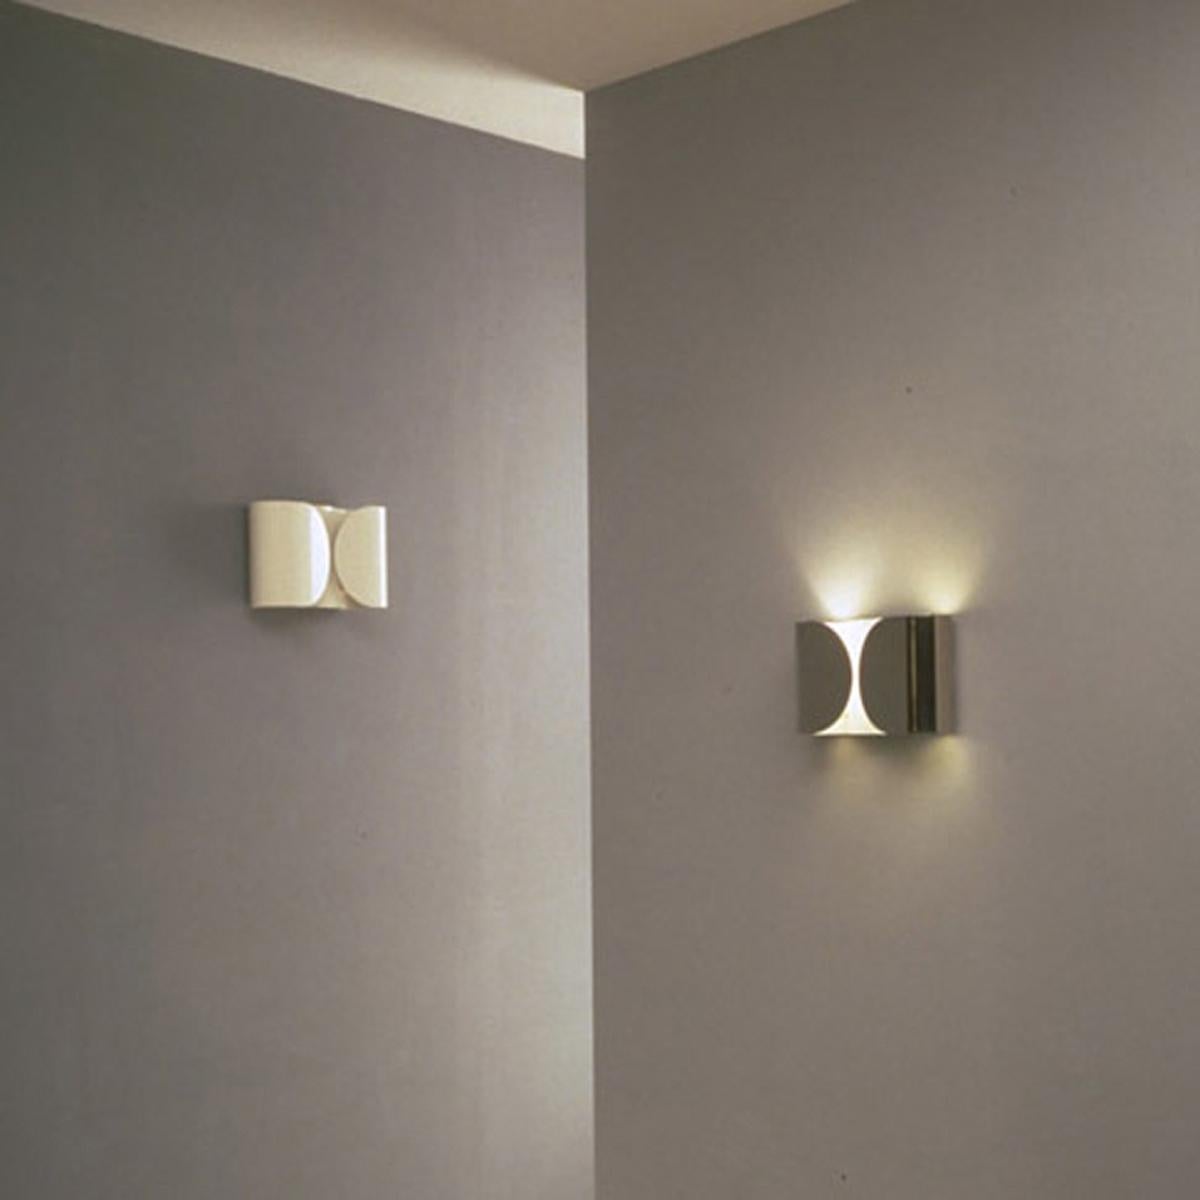 Resembling a shirt cuff, the contemporary Foglio wall lamp from design master Tobia Scarpa is a mixture of timeless and contemporary design. The lamp’s body is formed by power-painted pressed steel. The two lamp supports are injection-molded white